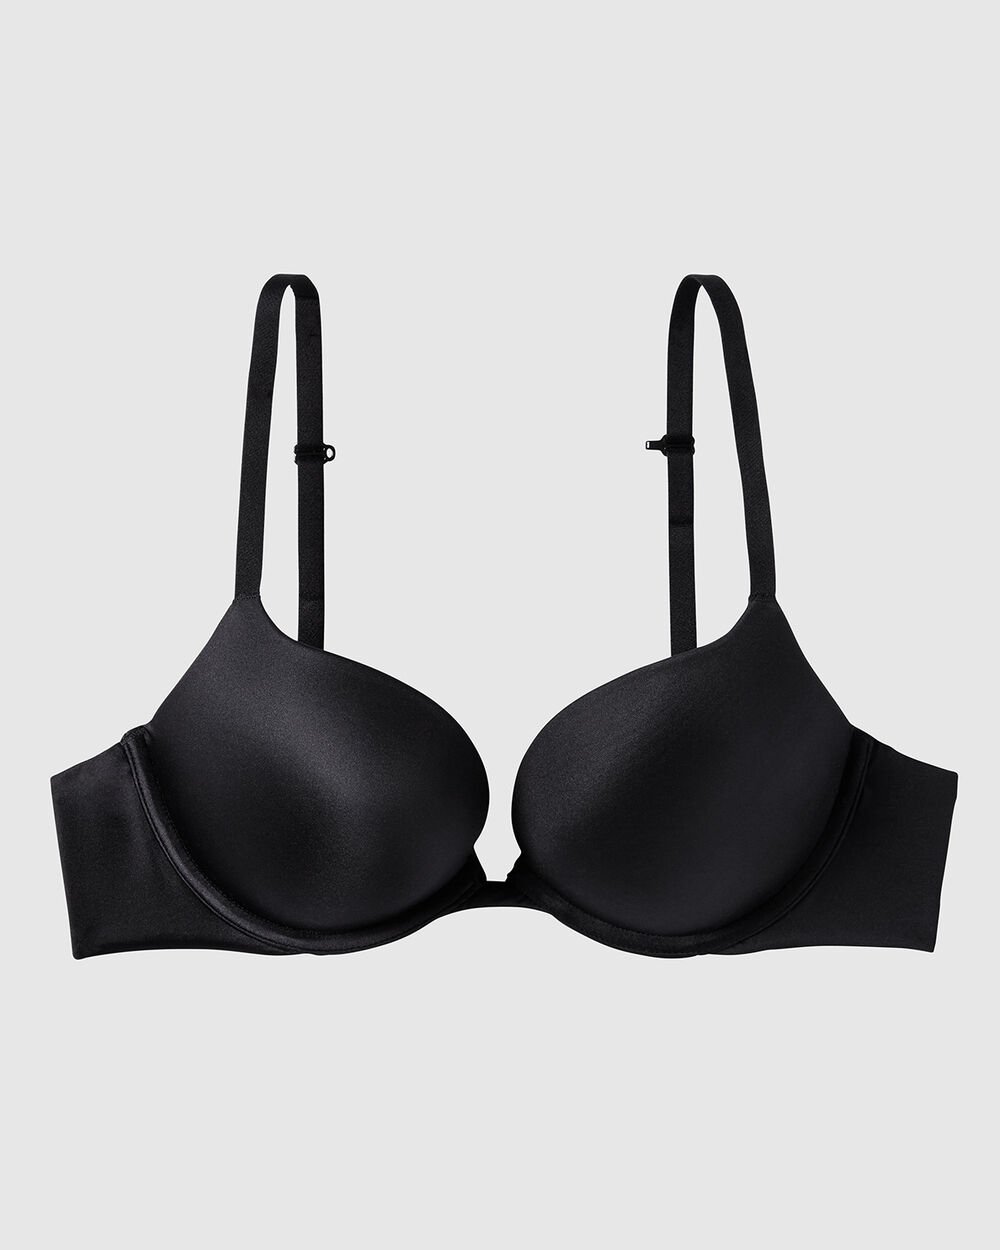 Unique bras – such as the Mardi Bra and the Bronx Bombers – up for